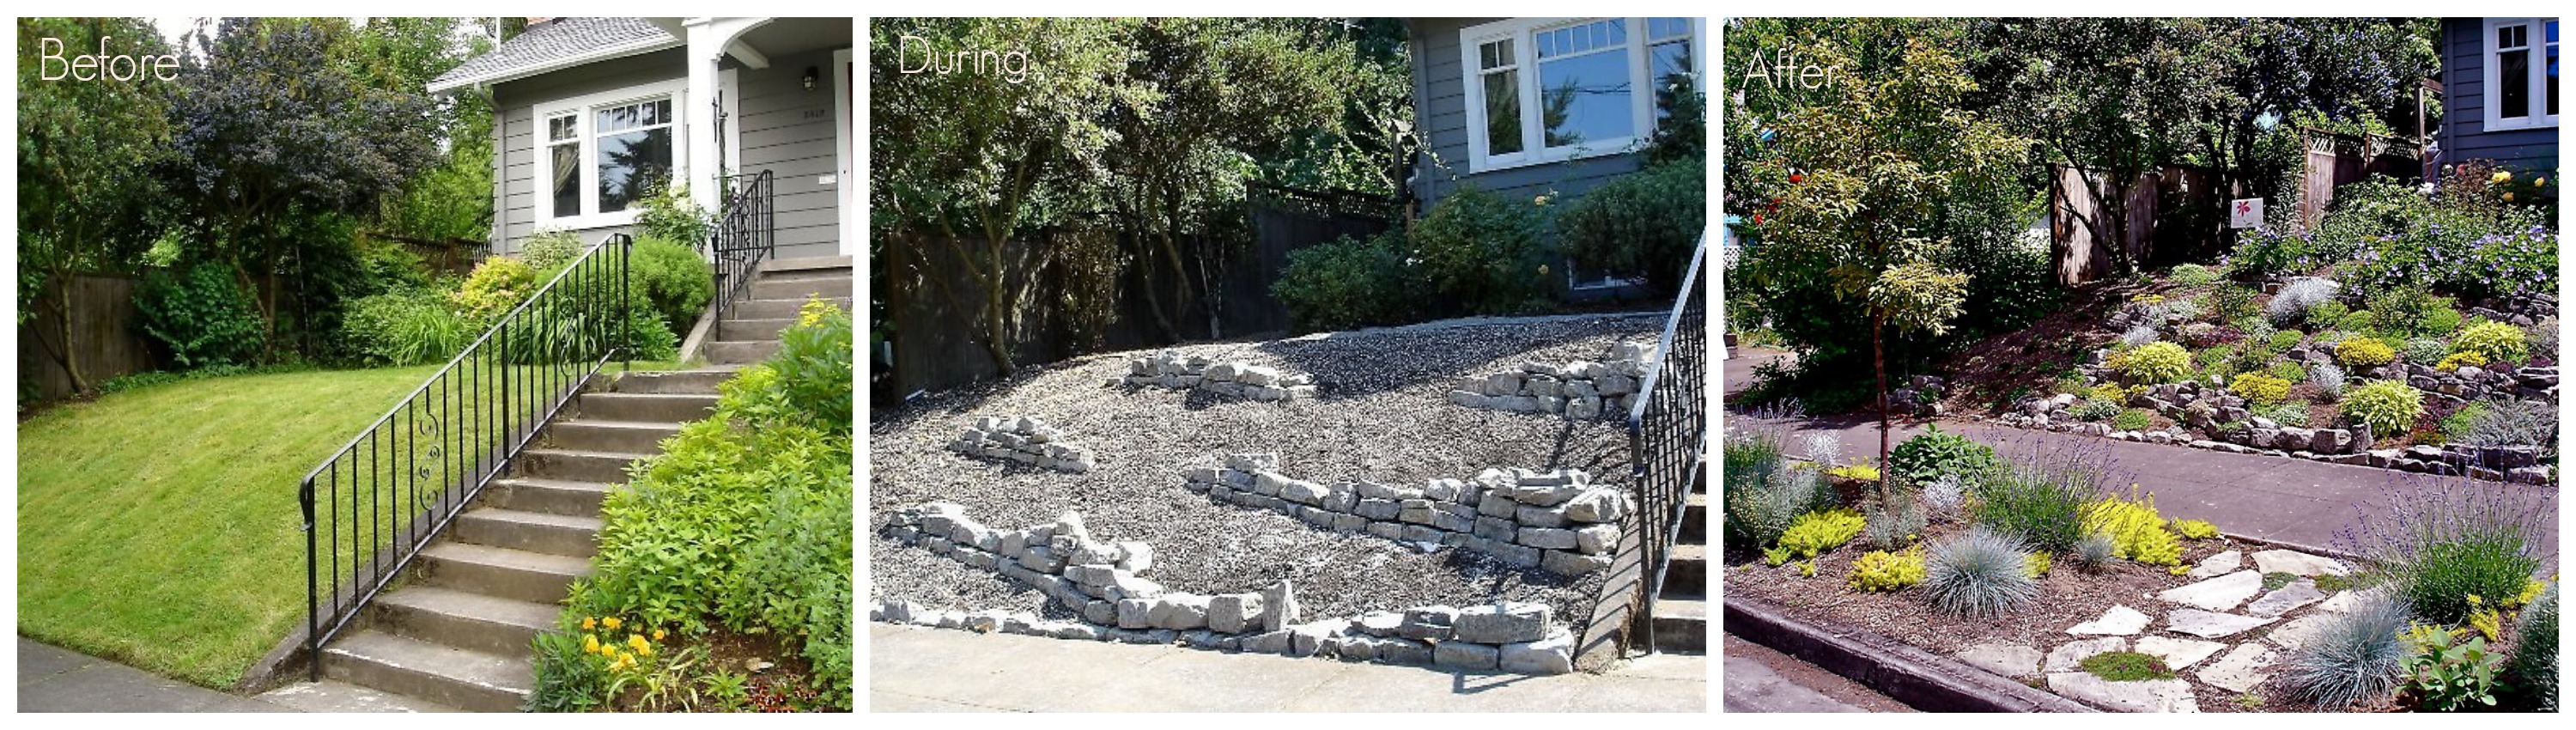 drought tolerant before and after.jpg